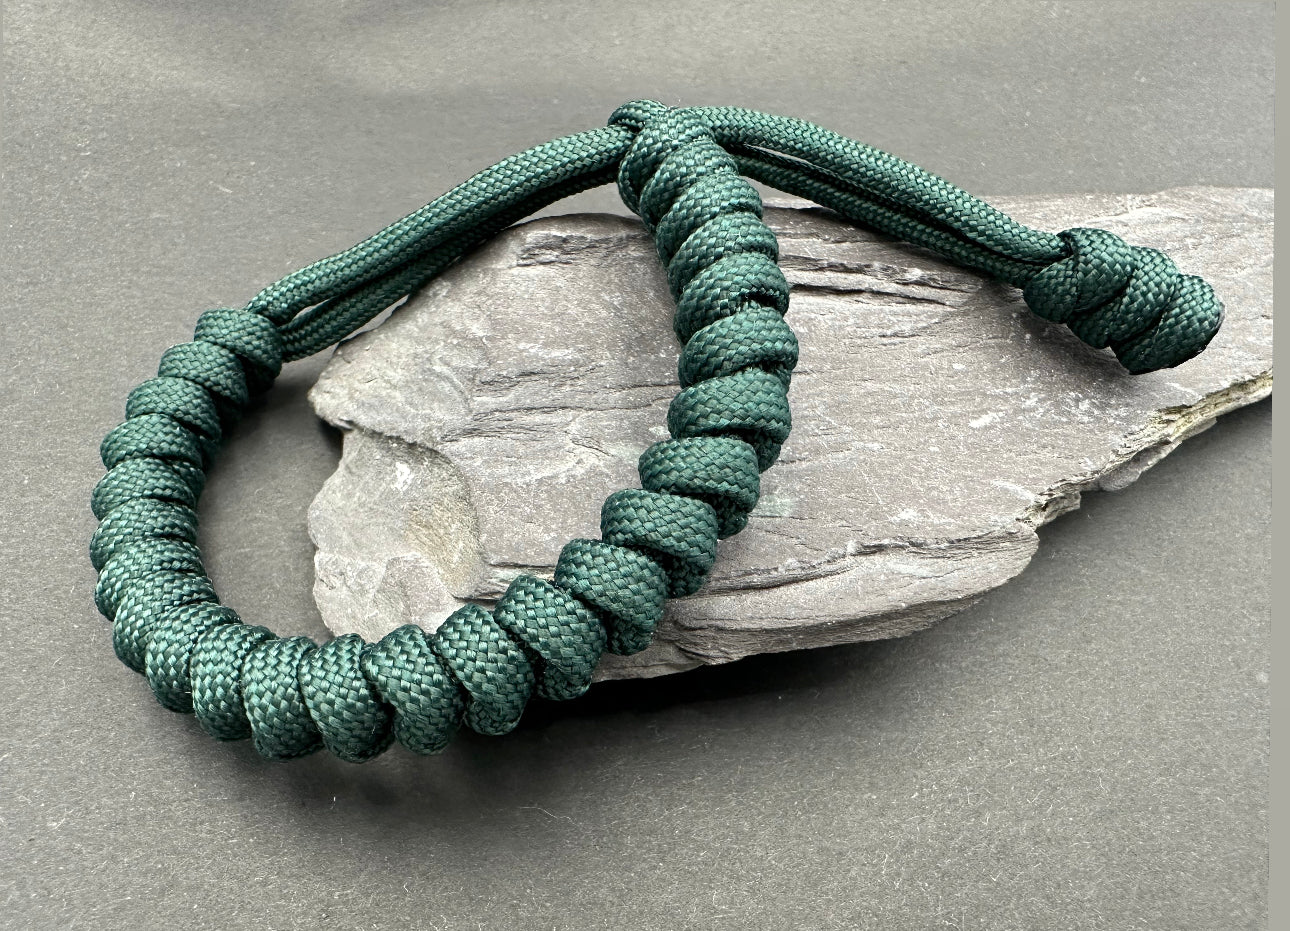 Paracord survival bracelets in an Emerald green colour. the item is lightweight comfortable and handmade in a snake knott tactical design U.K.